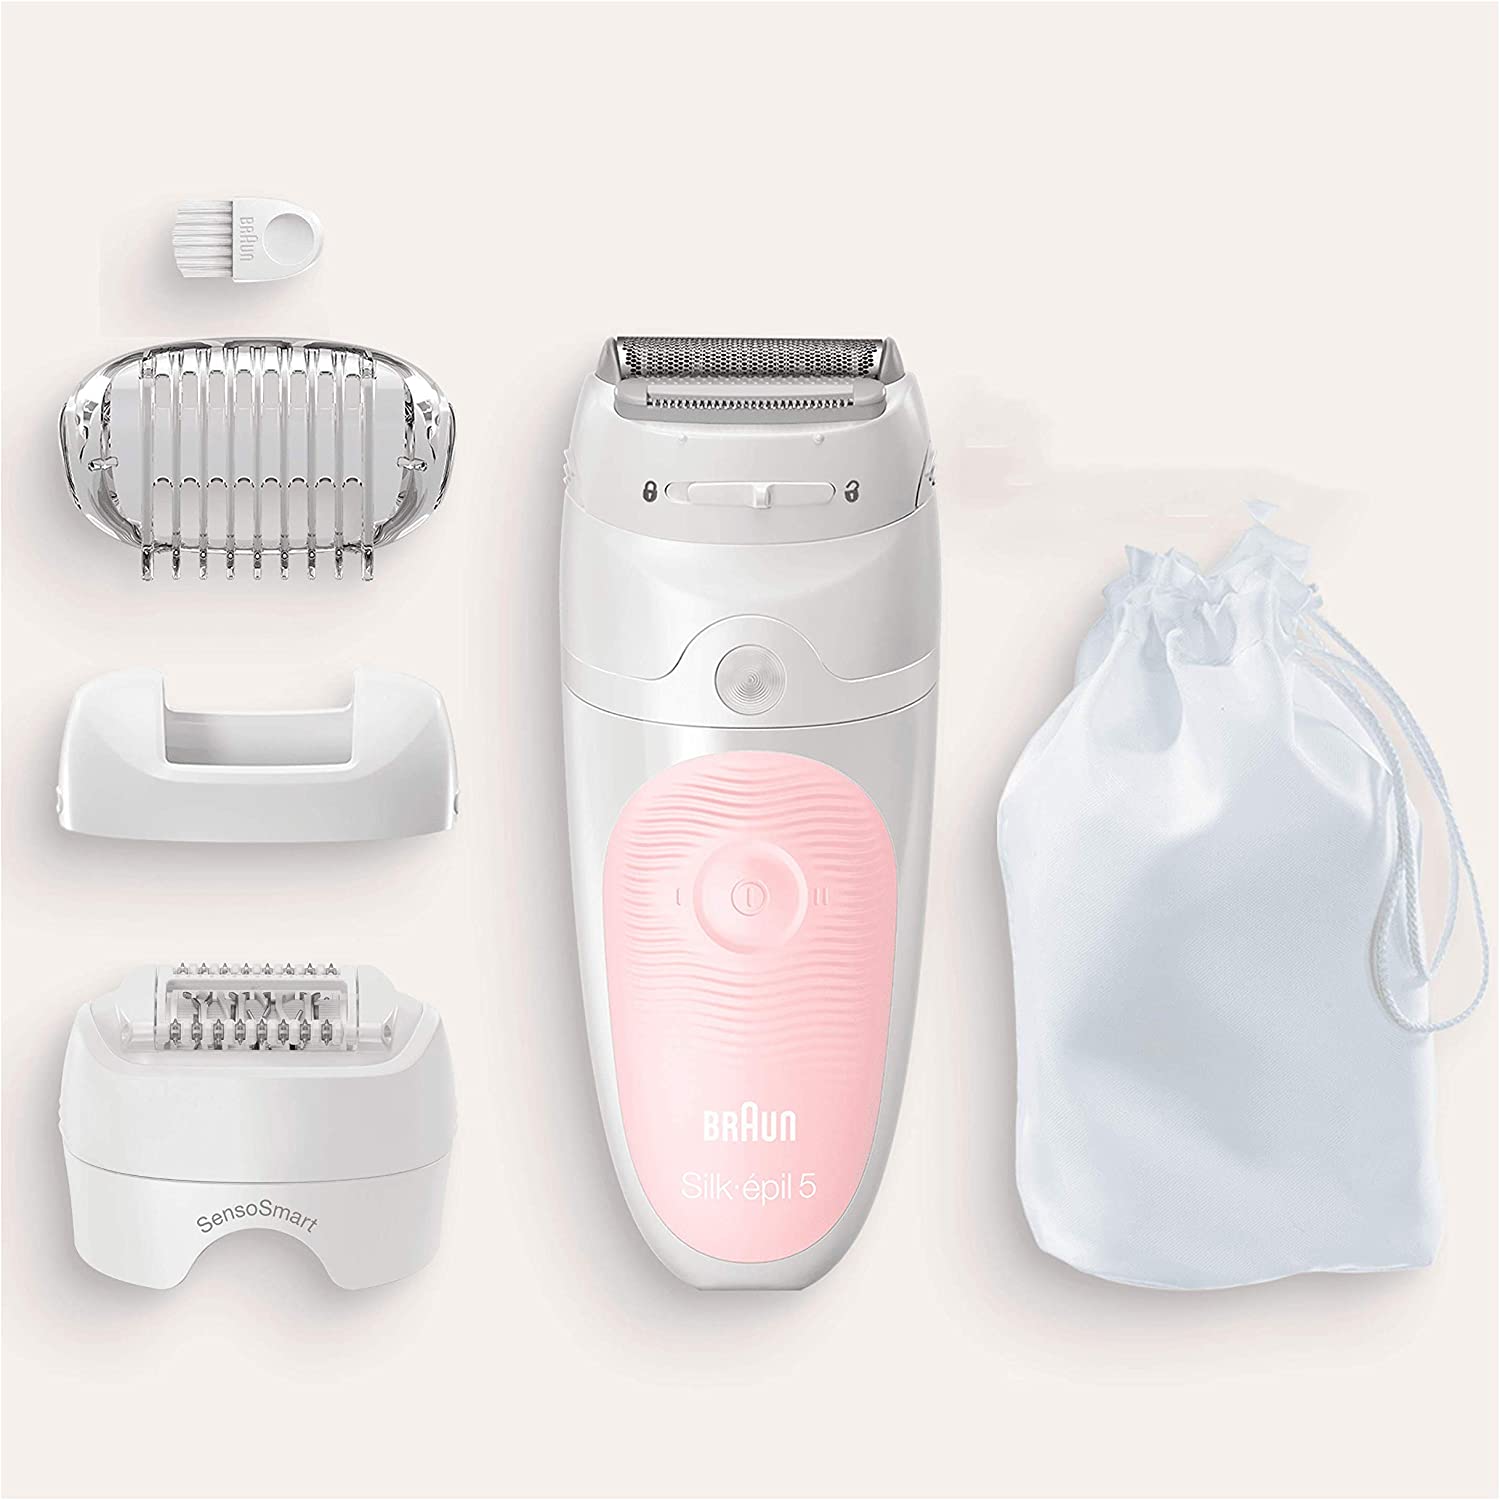 Braun Silk-épil 5 5-620, Epilator for Women, Includes Shaver and Trimmer Head for Gentle Hair Removal - Healthxpress.ie